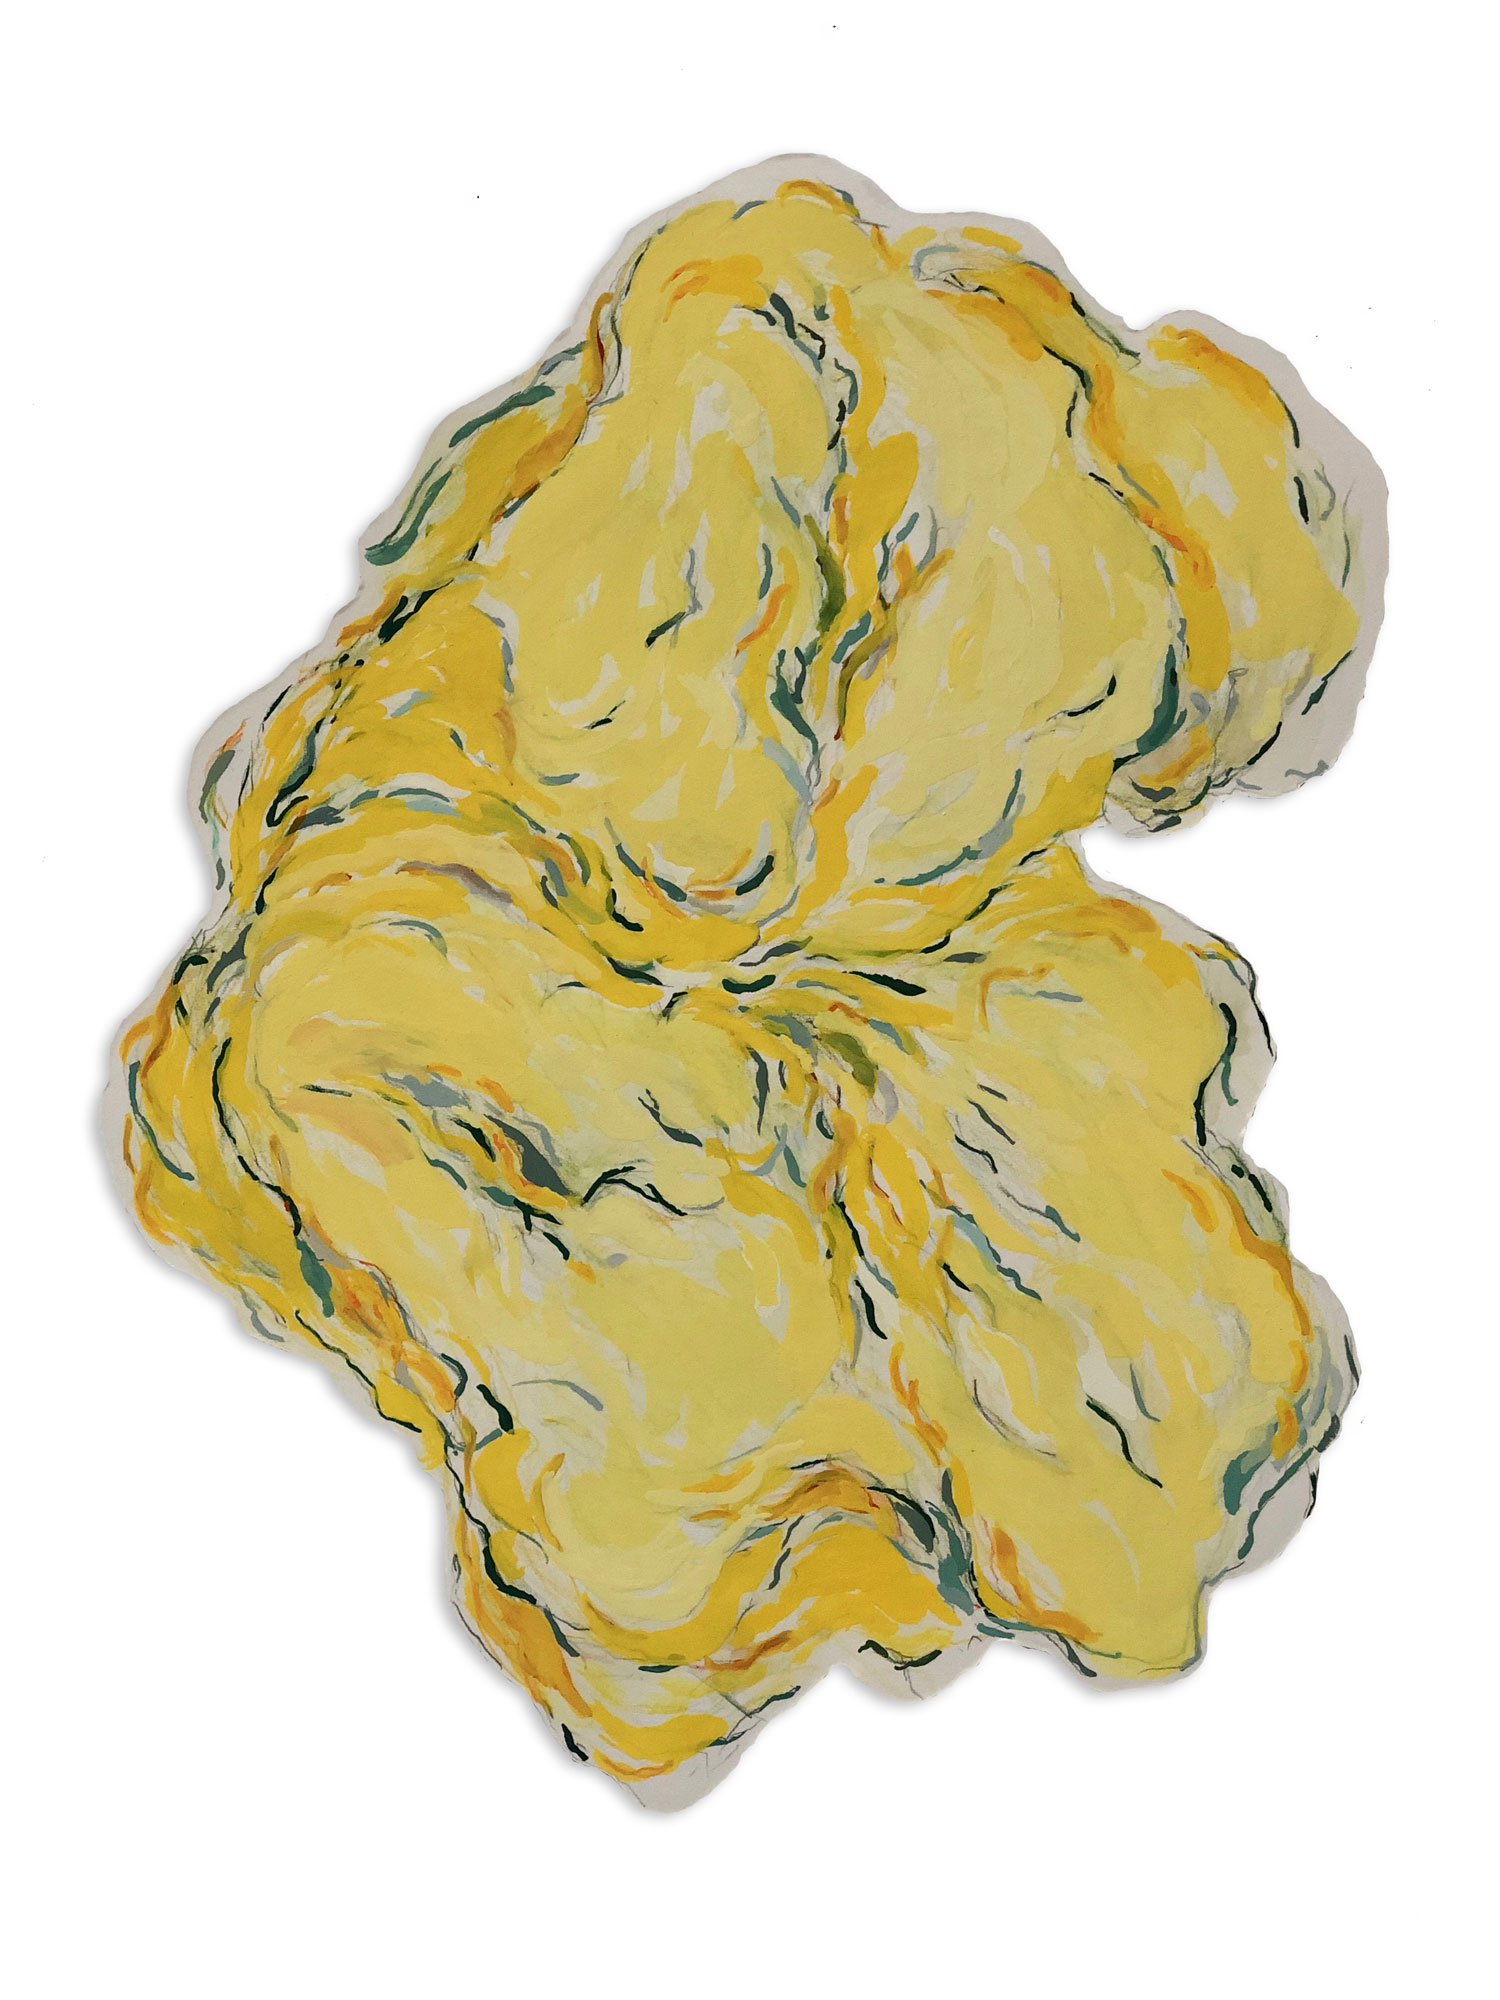 Untitled (Frilly Yellow)